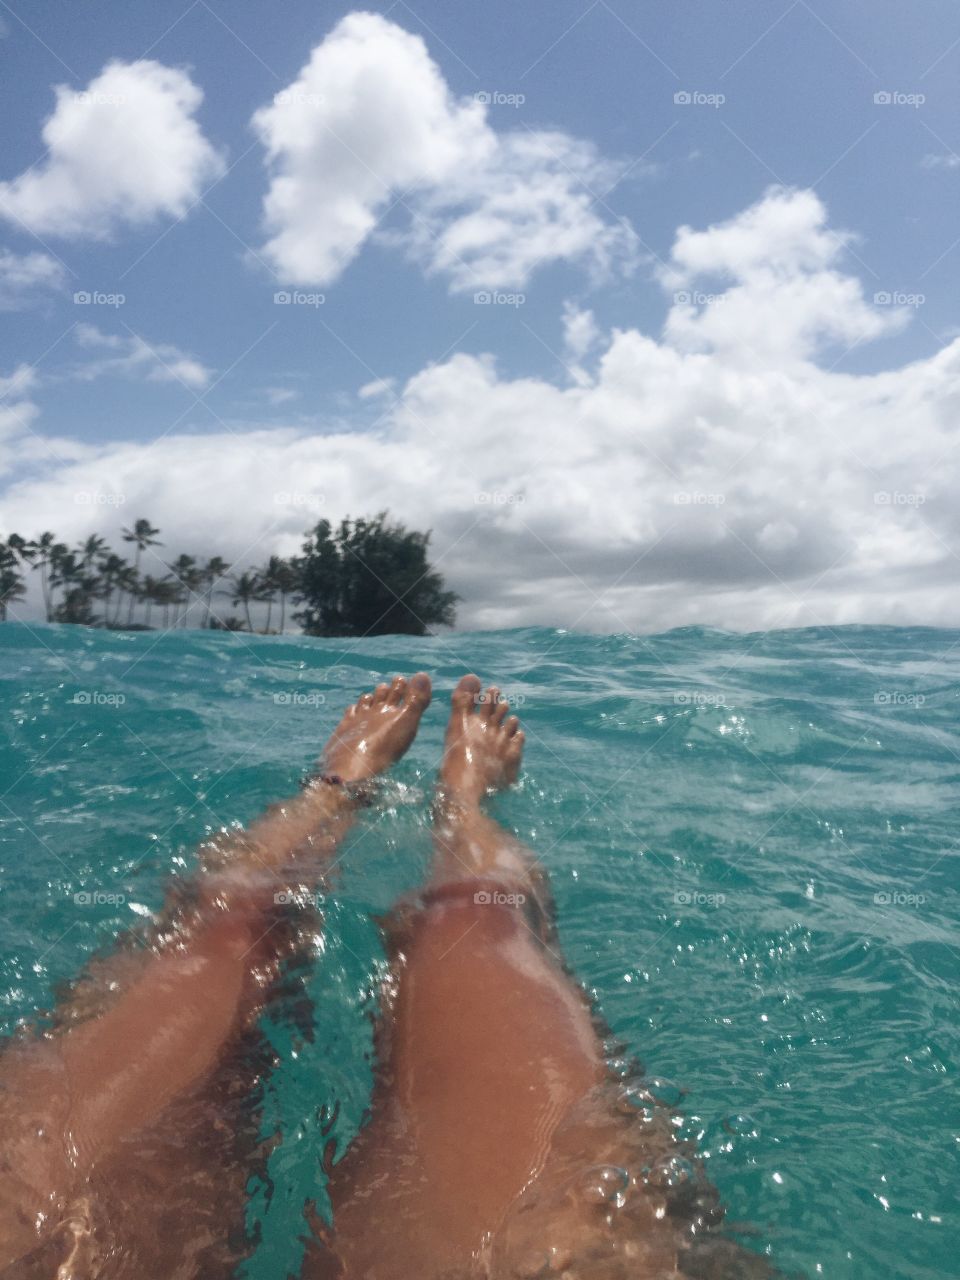 Relaxing and floating in the ocean.